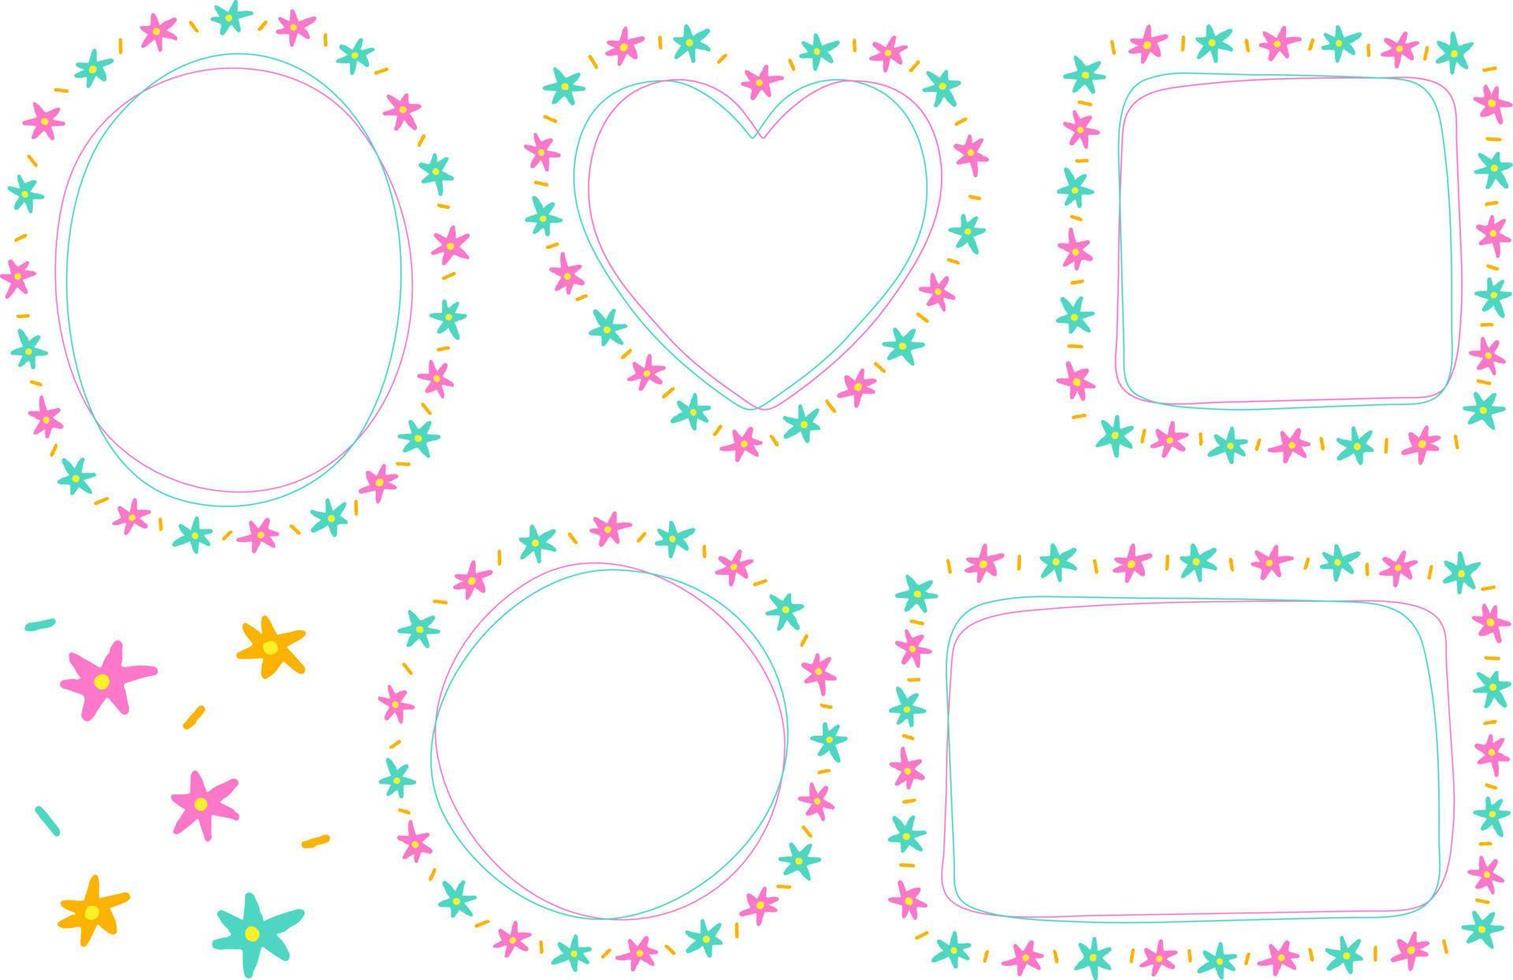 Abstract Bright Green Pink Daisy Star Flower Doodle Hand Drawing Drawn Heart Circle Square Oval Rectangle Sticky note Shape Line Borders Frames Plate Set Collection Background Vector Illustration